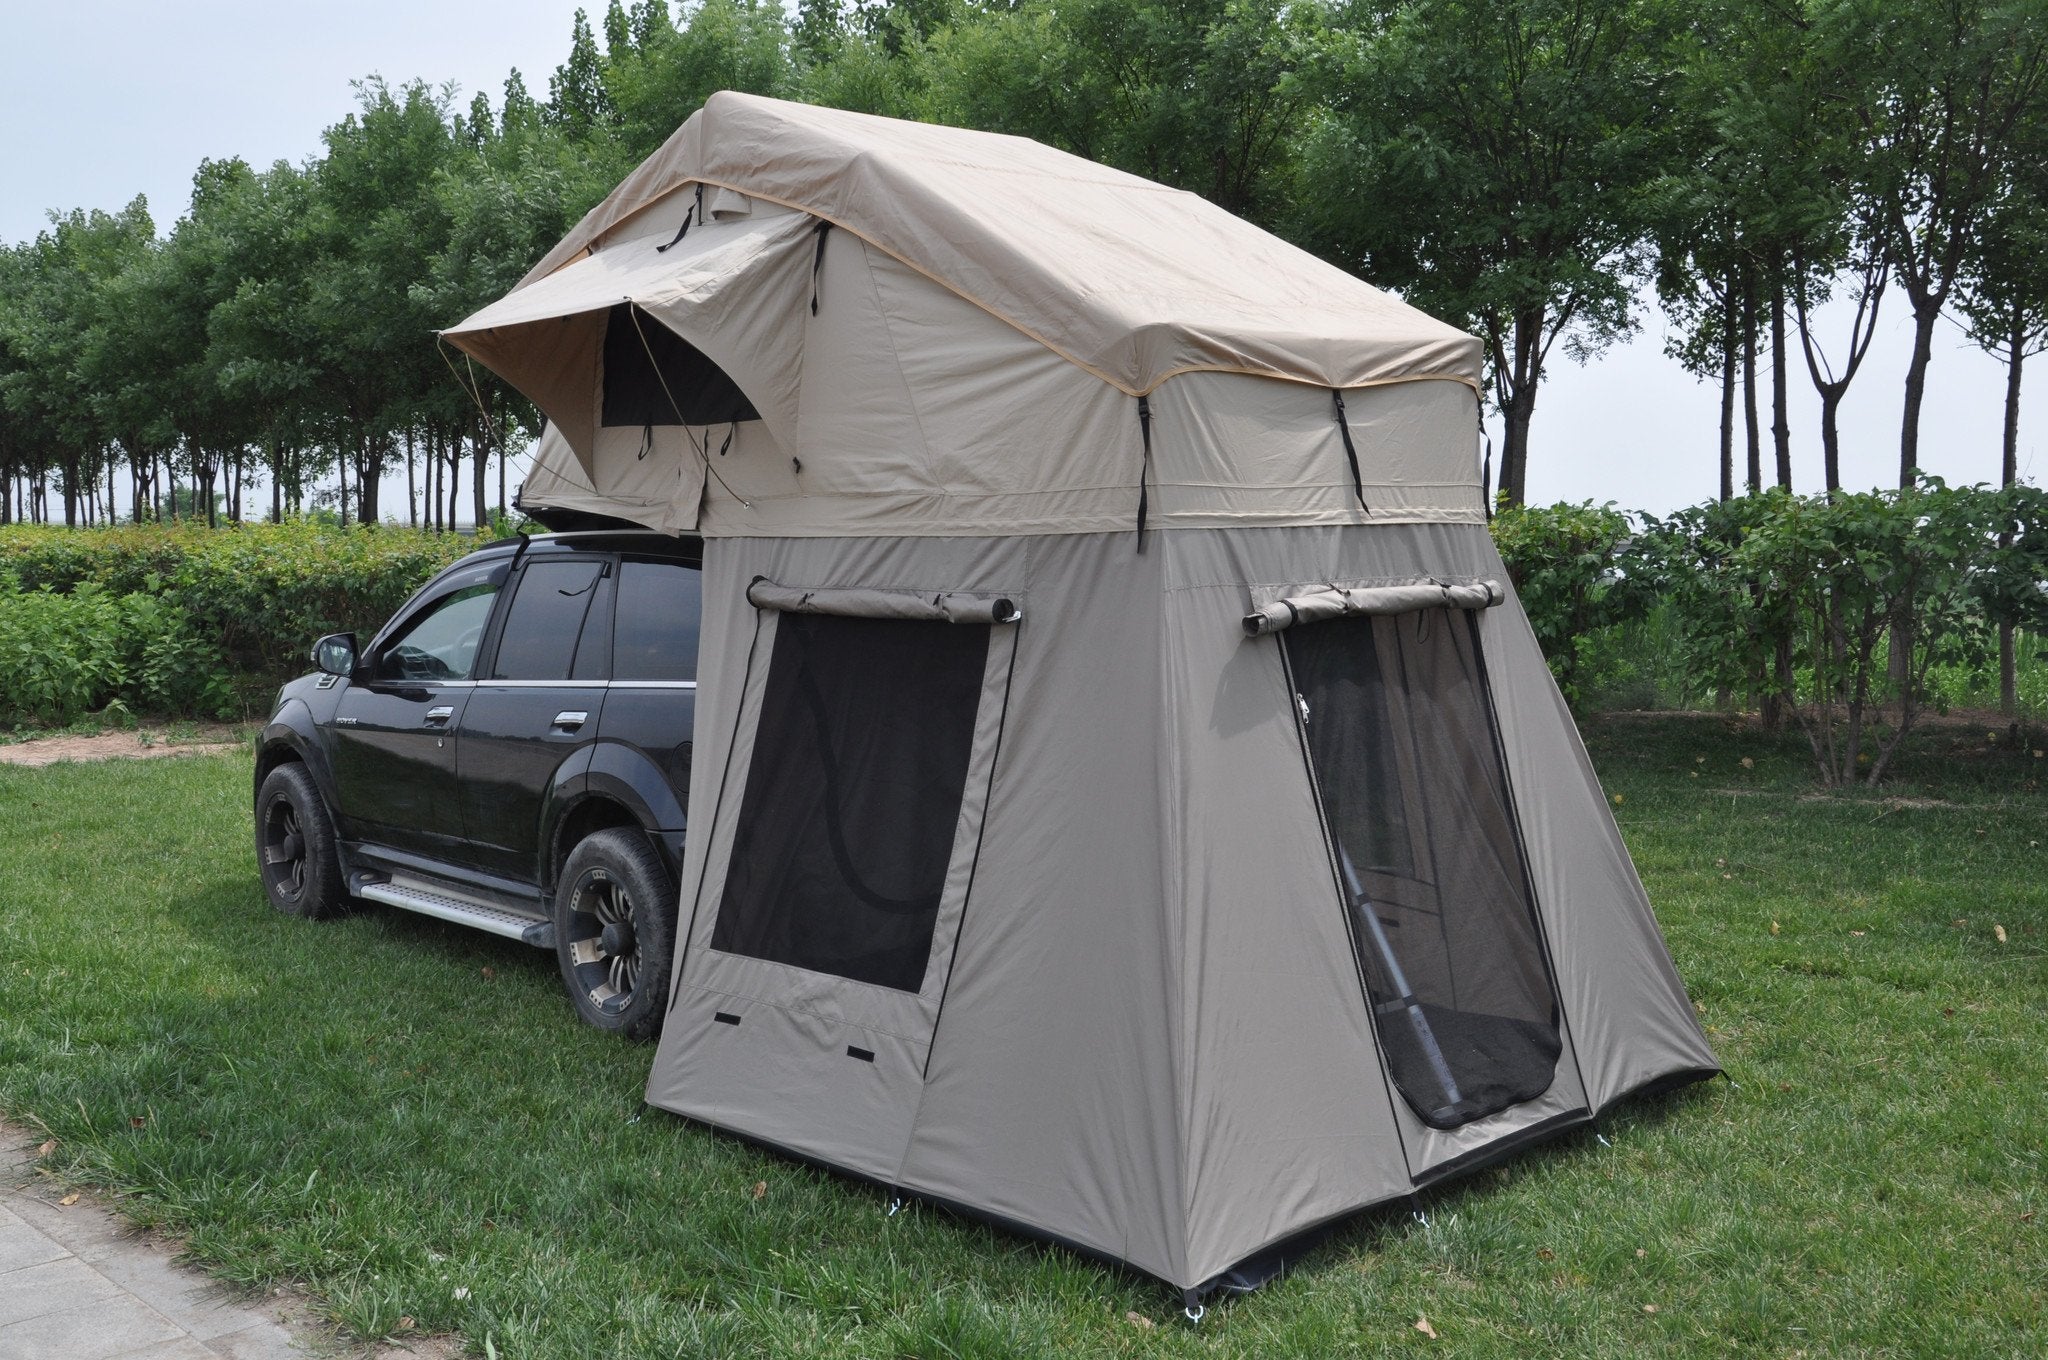 New silnylon tents, canvas tents, roof top tents and inflatable tents on the way.